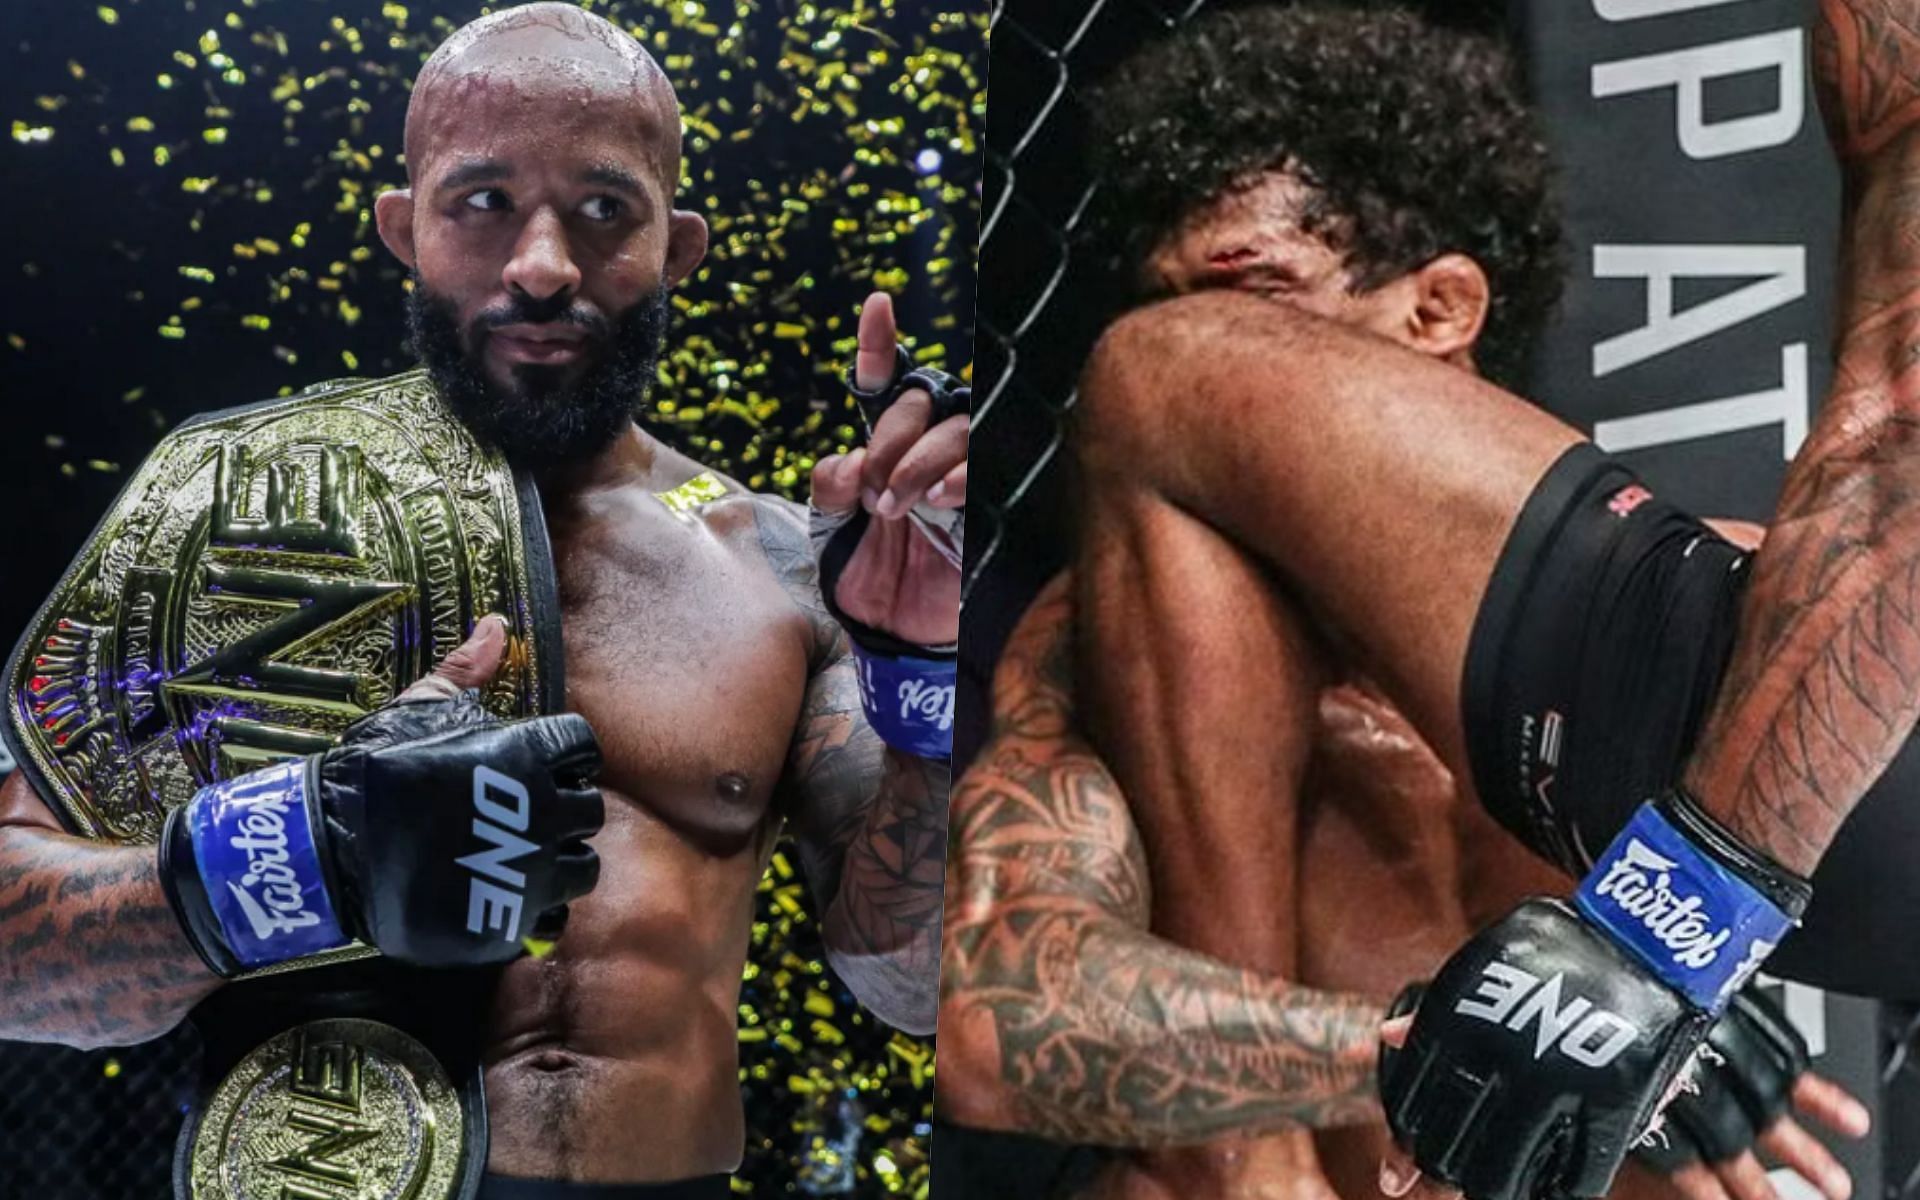 Demetrious Johnson said he put everything he had on that spectacular flying knee finish vs. Adriano Moraes. | Photo by ONE Championship